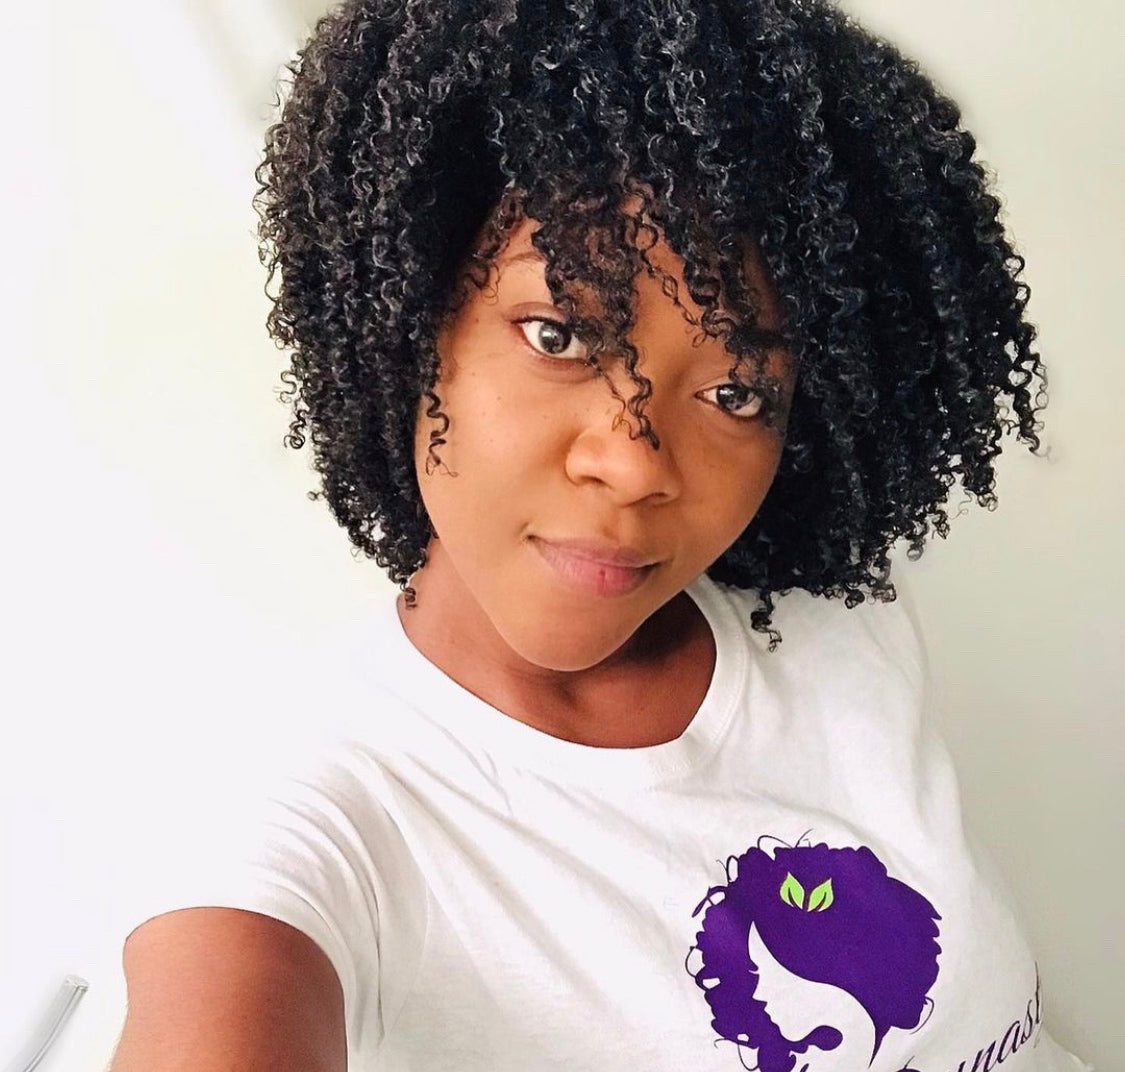 Nickie showing her hair after using Curls Dynasty products.